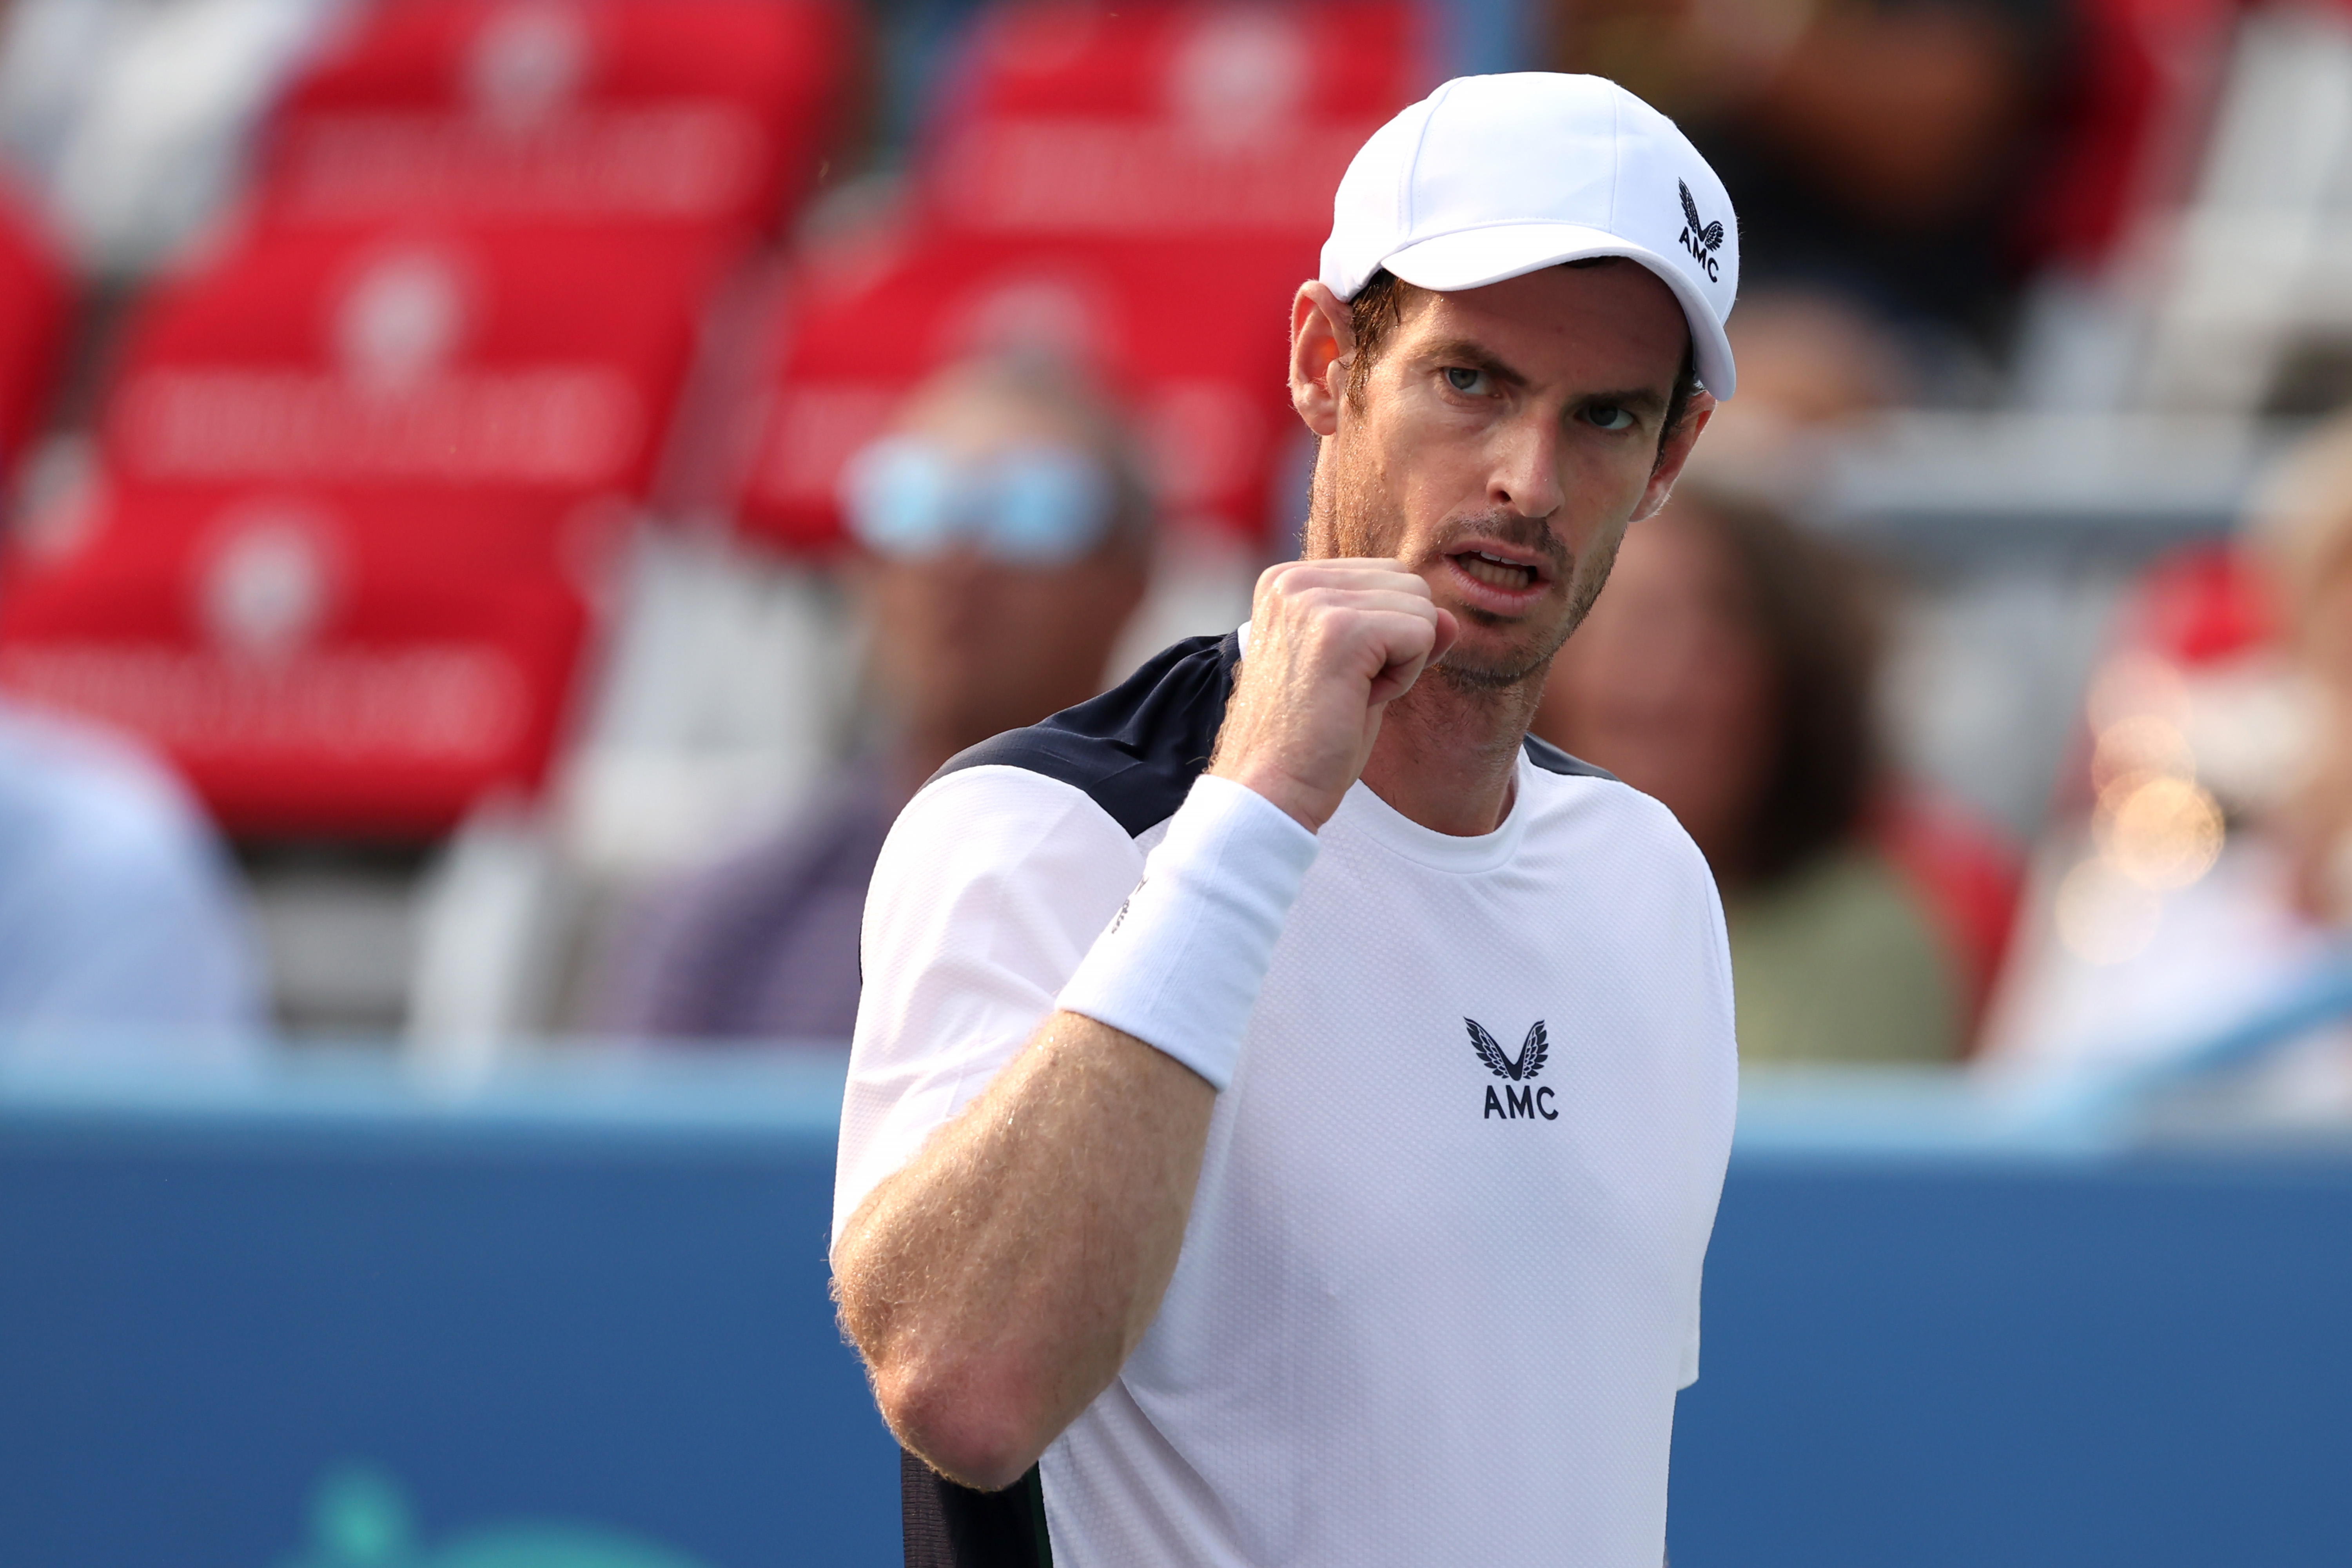 Andy Murray scores first win in Washington, D.C